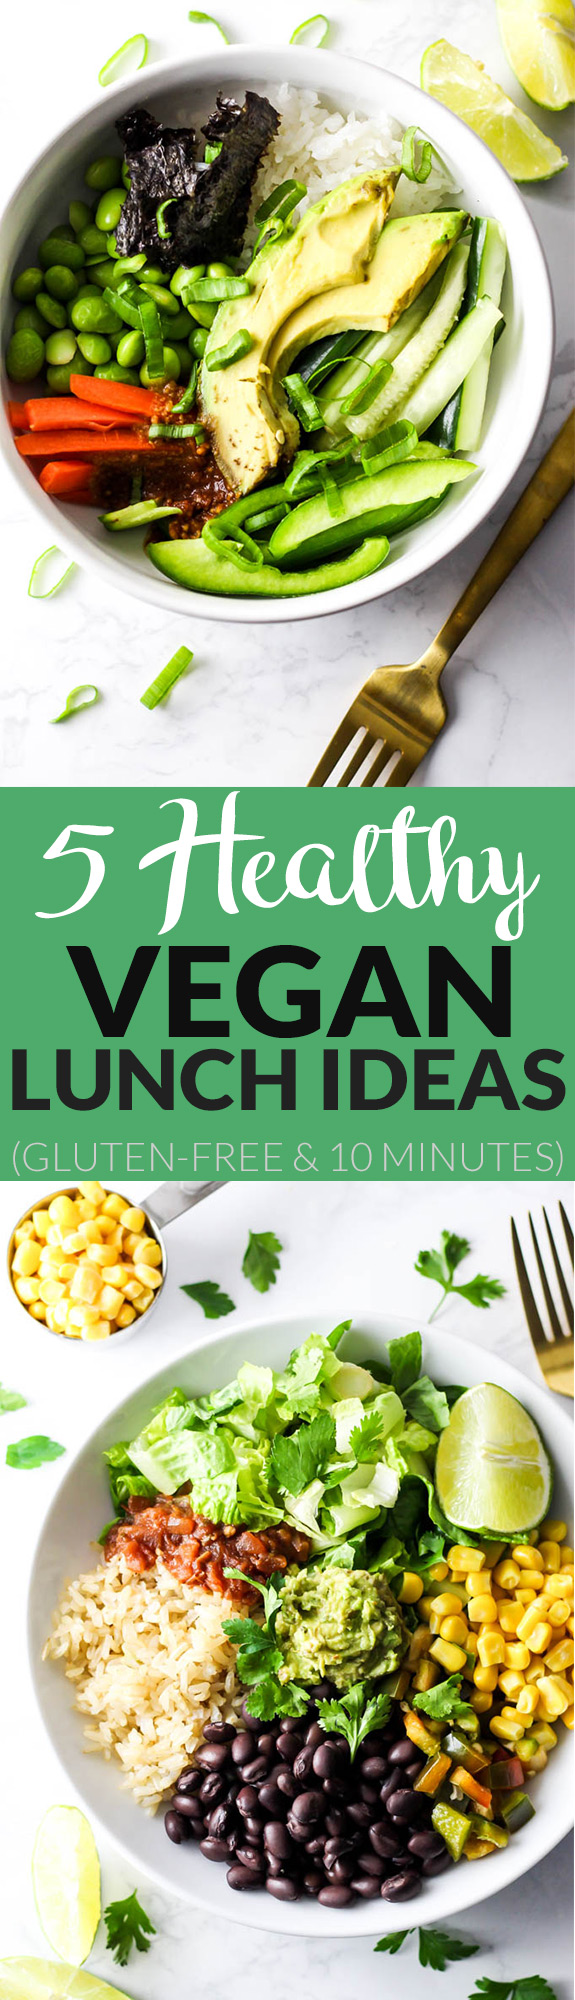 Use these 5 Healthy Vegan Lunch Ideas to pack wholesome lunches for work or school! These recipes are packed with vegetables & flavor to keep you satisfied.